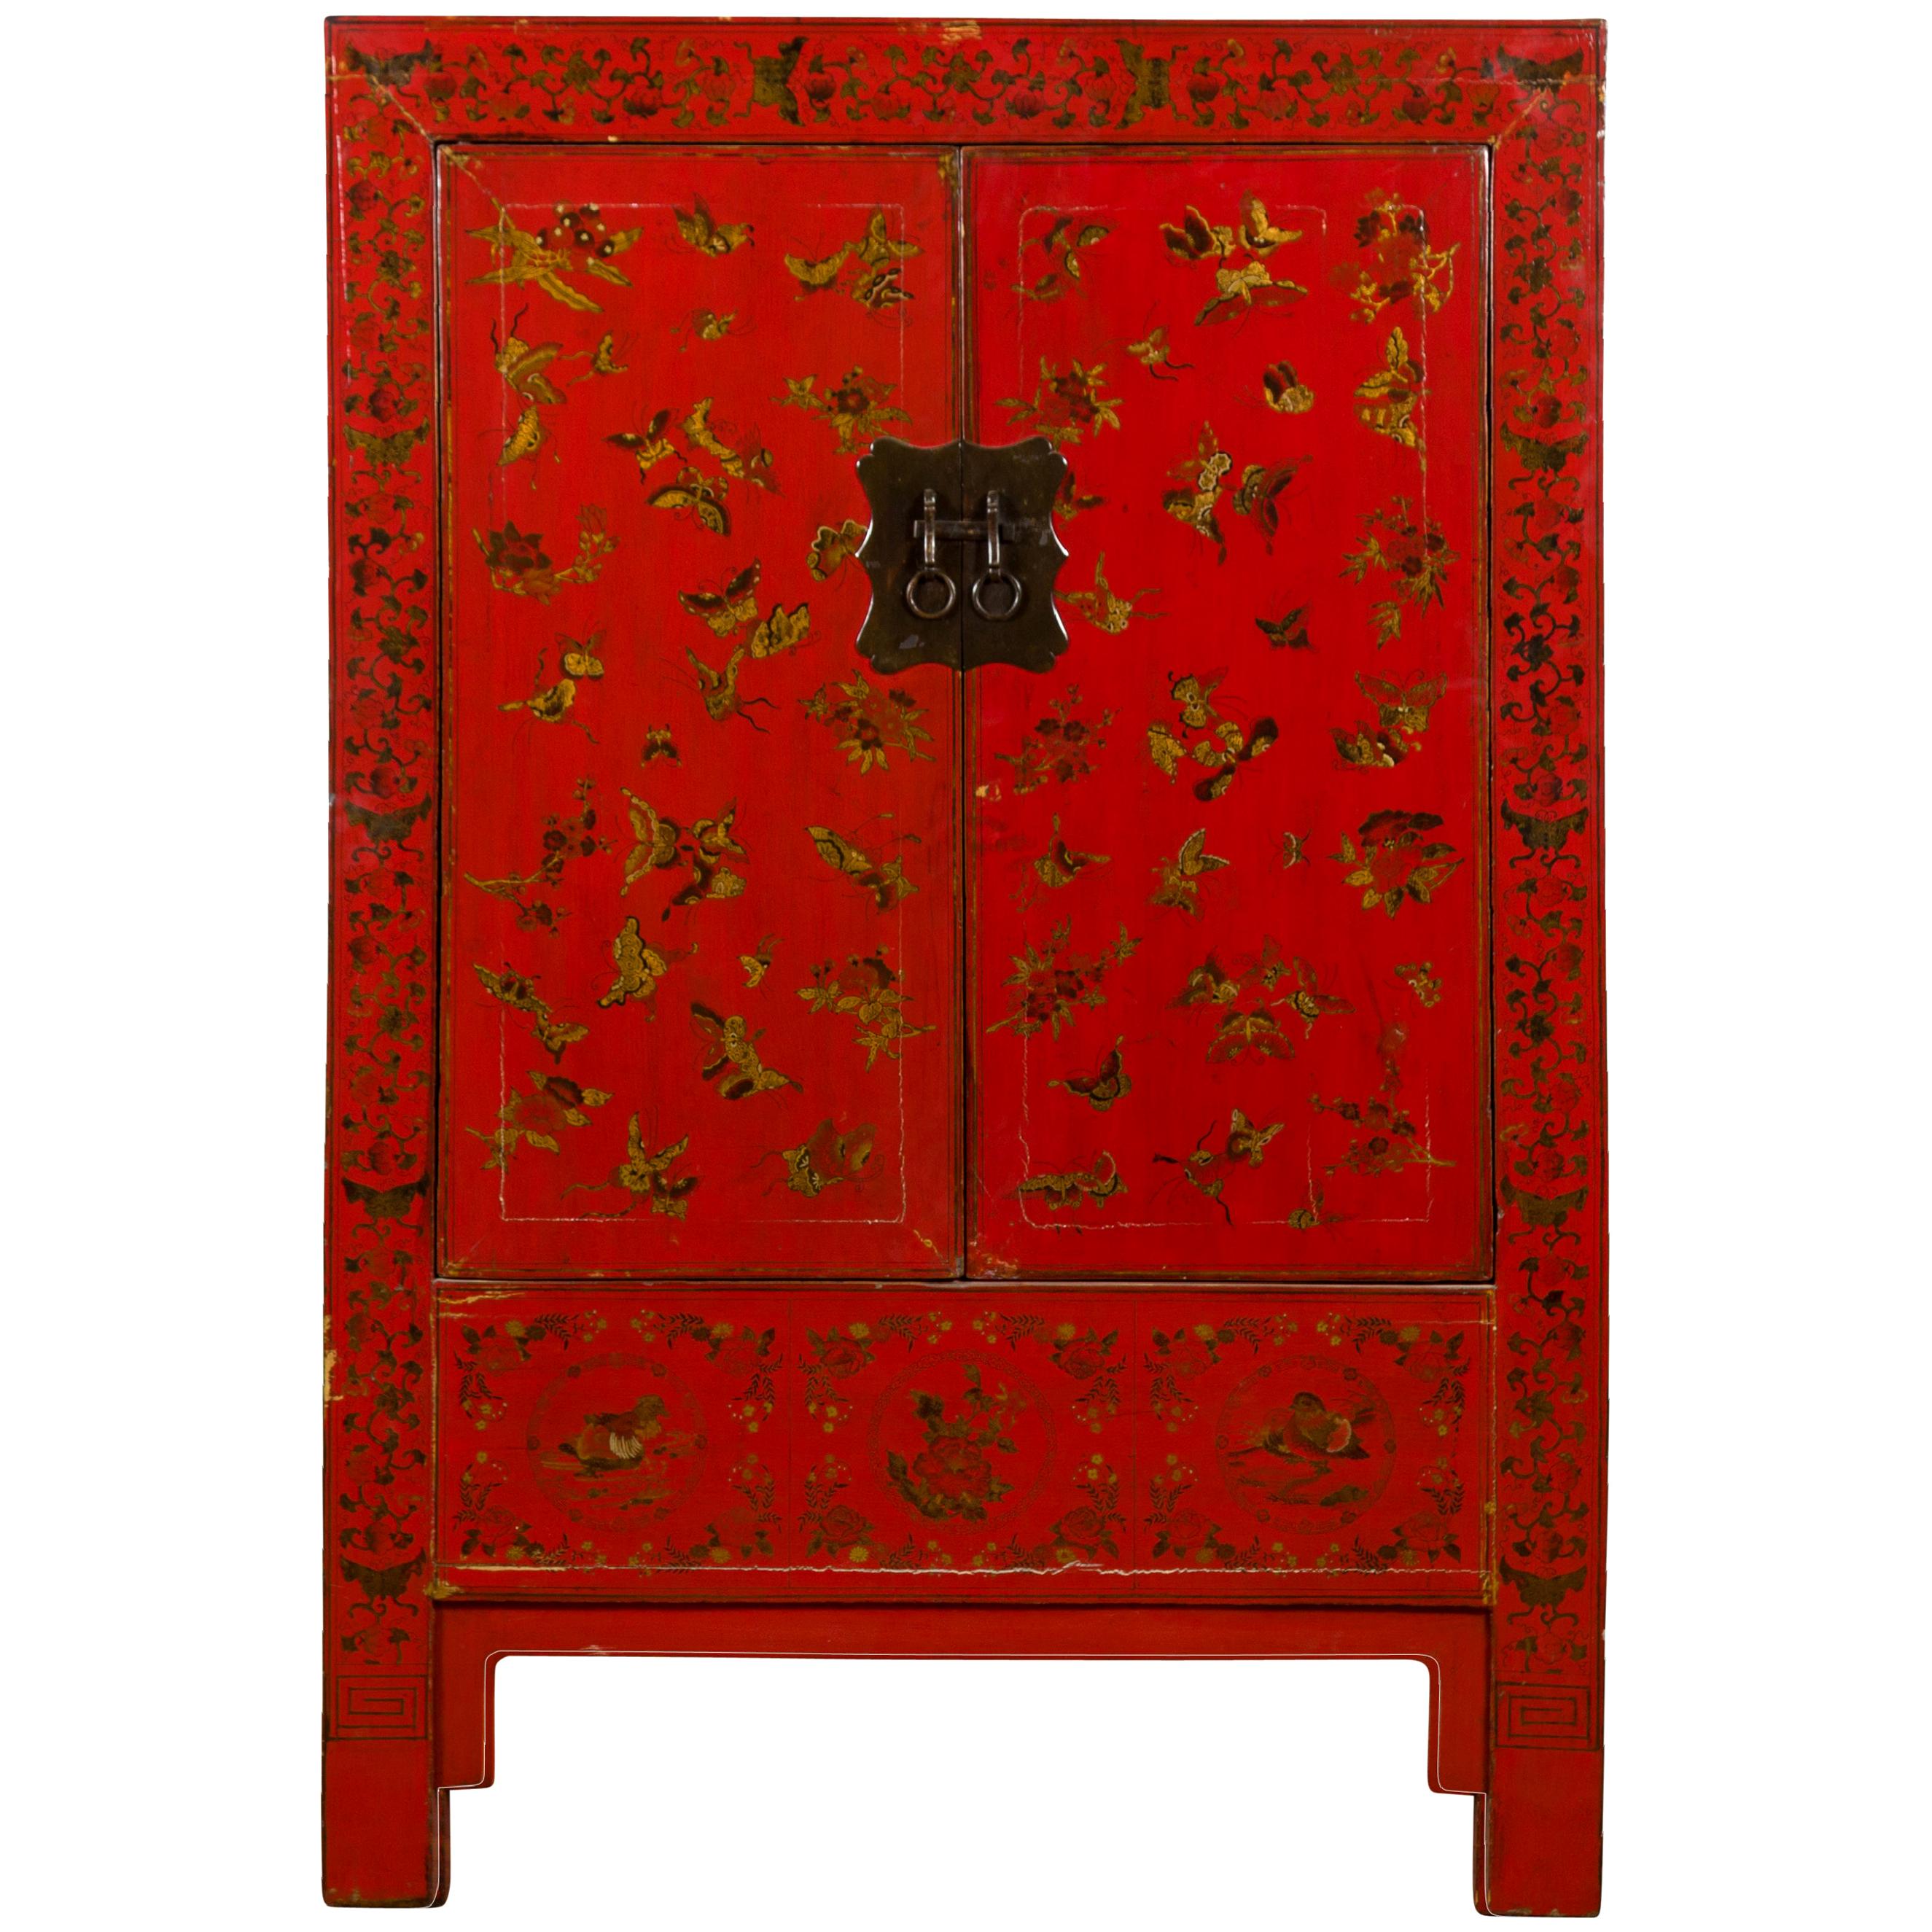 Chinese Red Lacquered 19th Century Qing Dynasty Cabinet with Gilt Chinoiseries For Sale